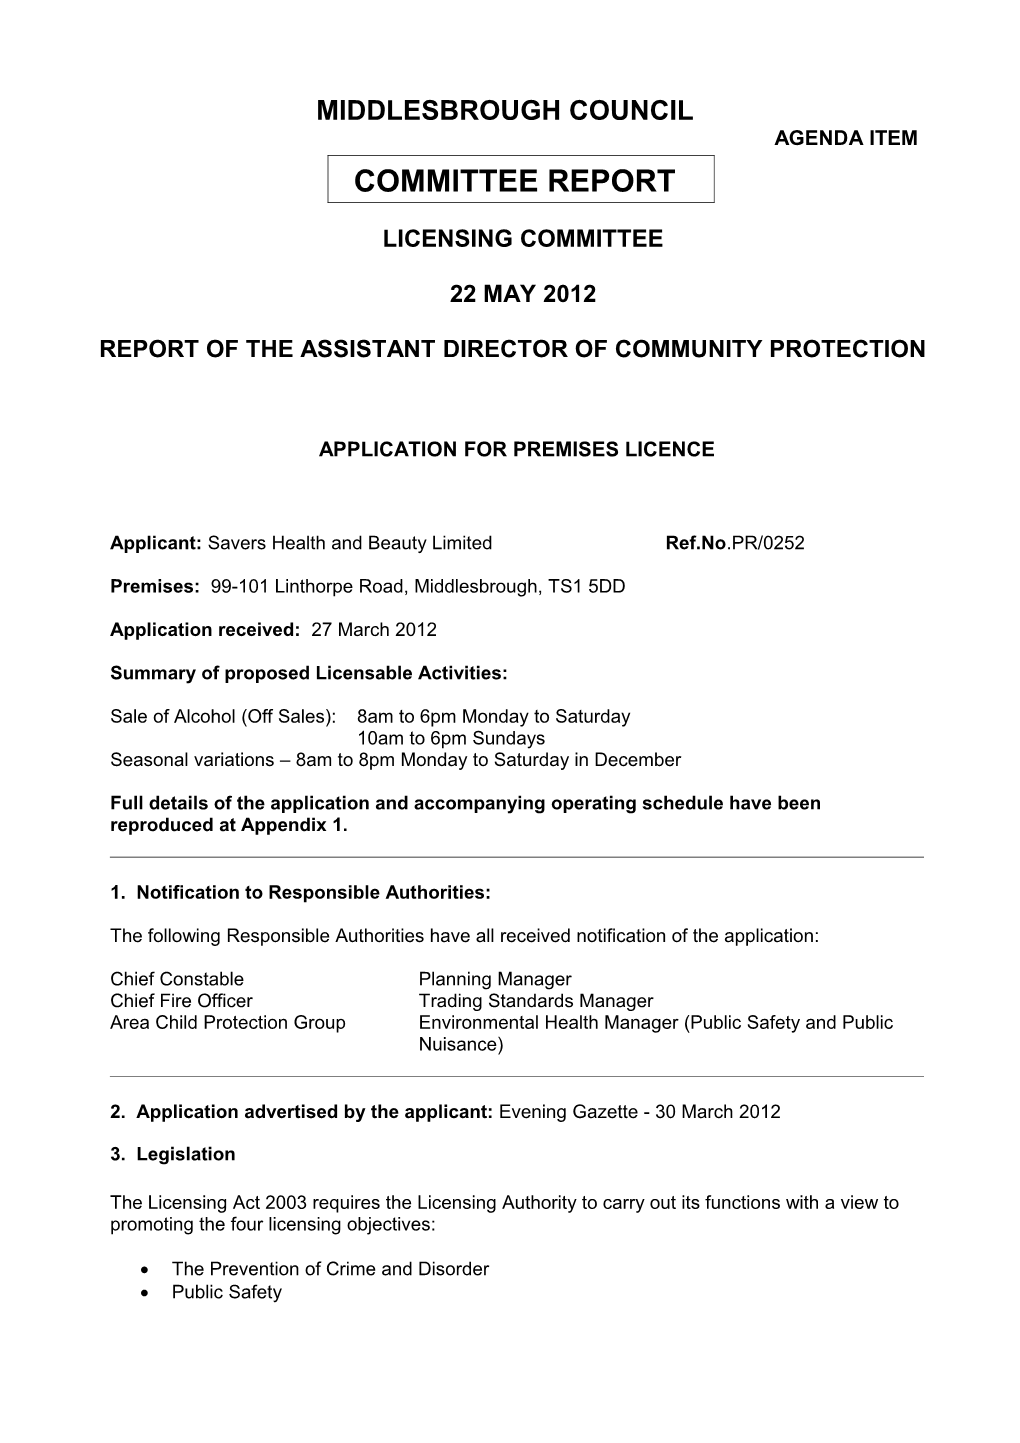 Report of the Assistant Director of Community Protection